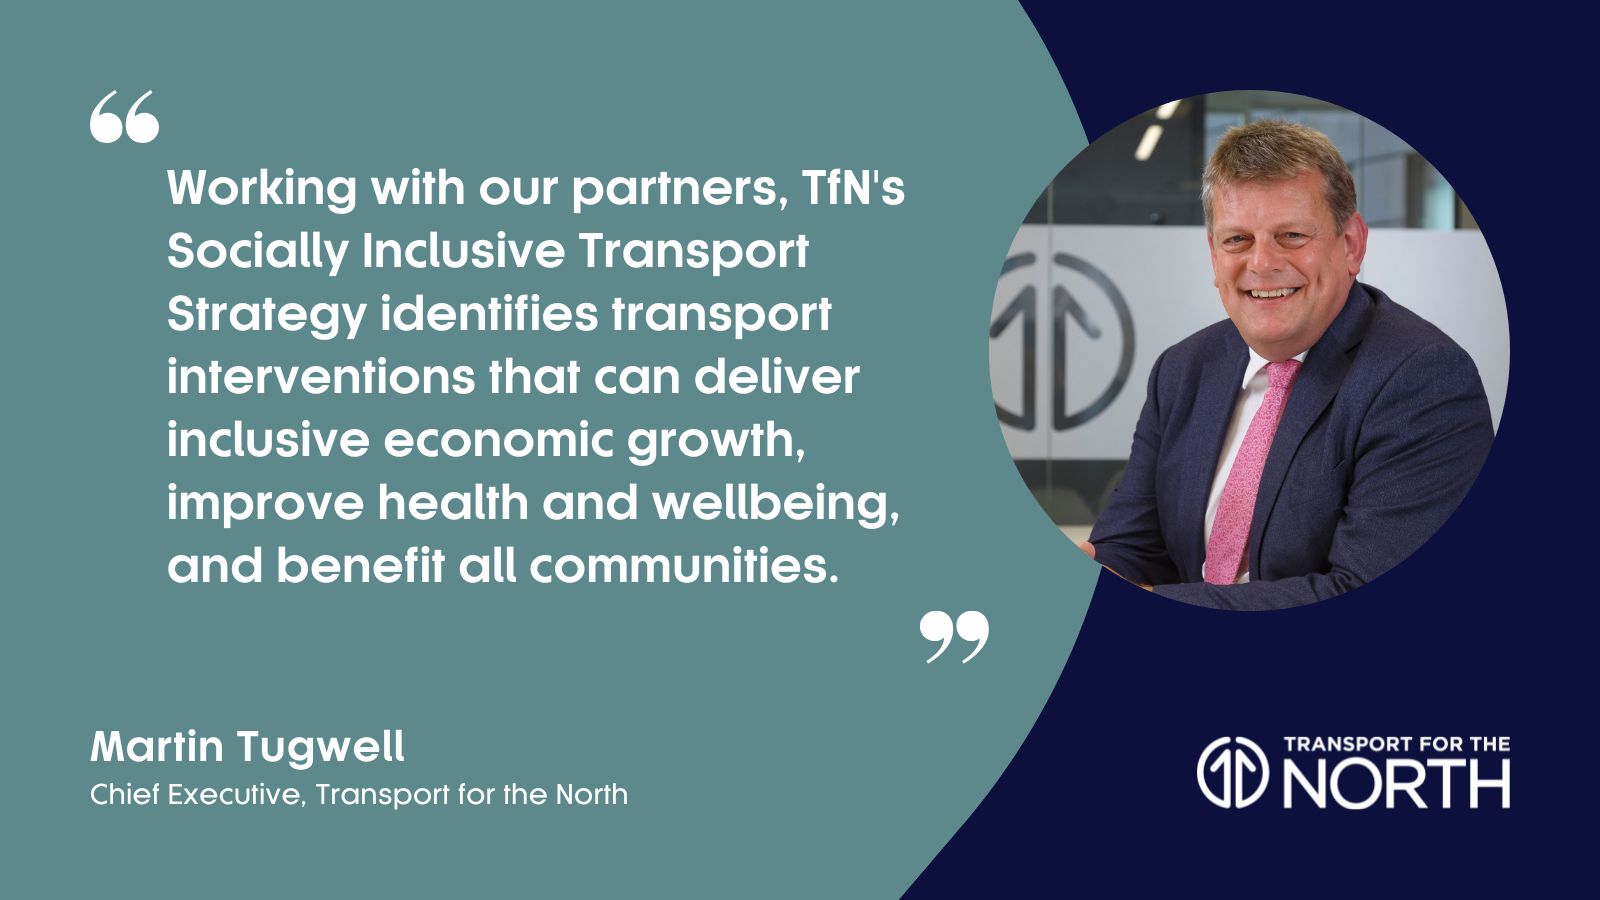 Martin Tugwell on Transport for the North's Socially Inclusive Transport Strategy